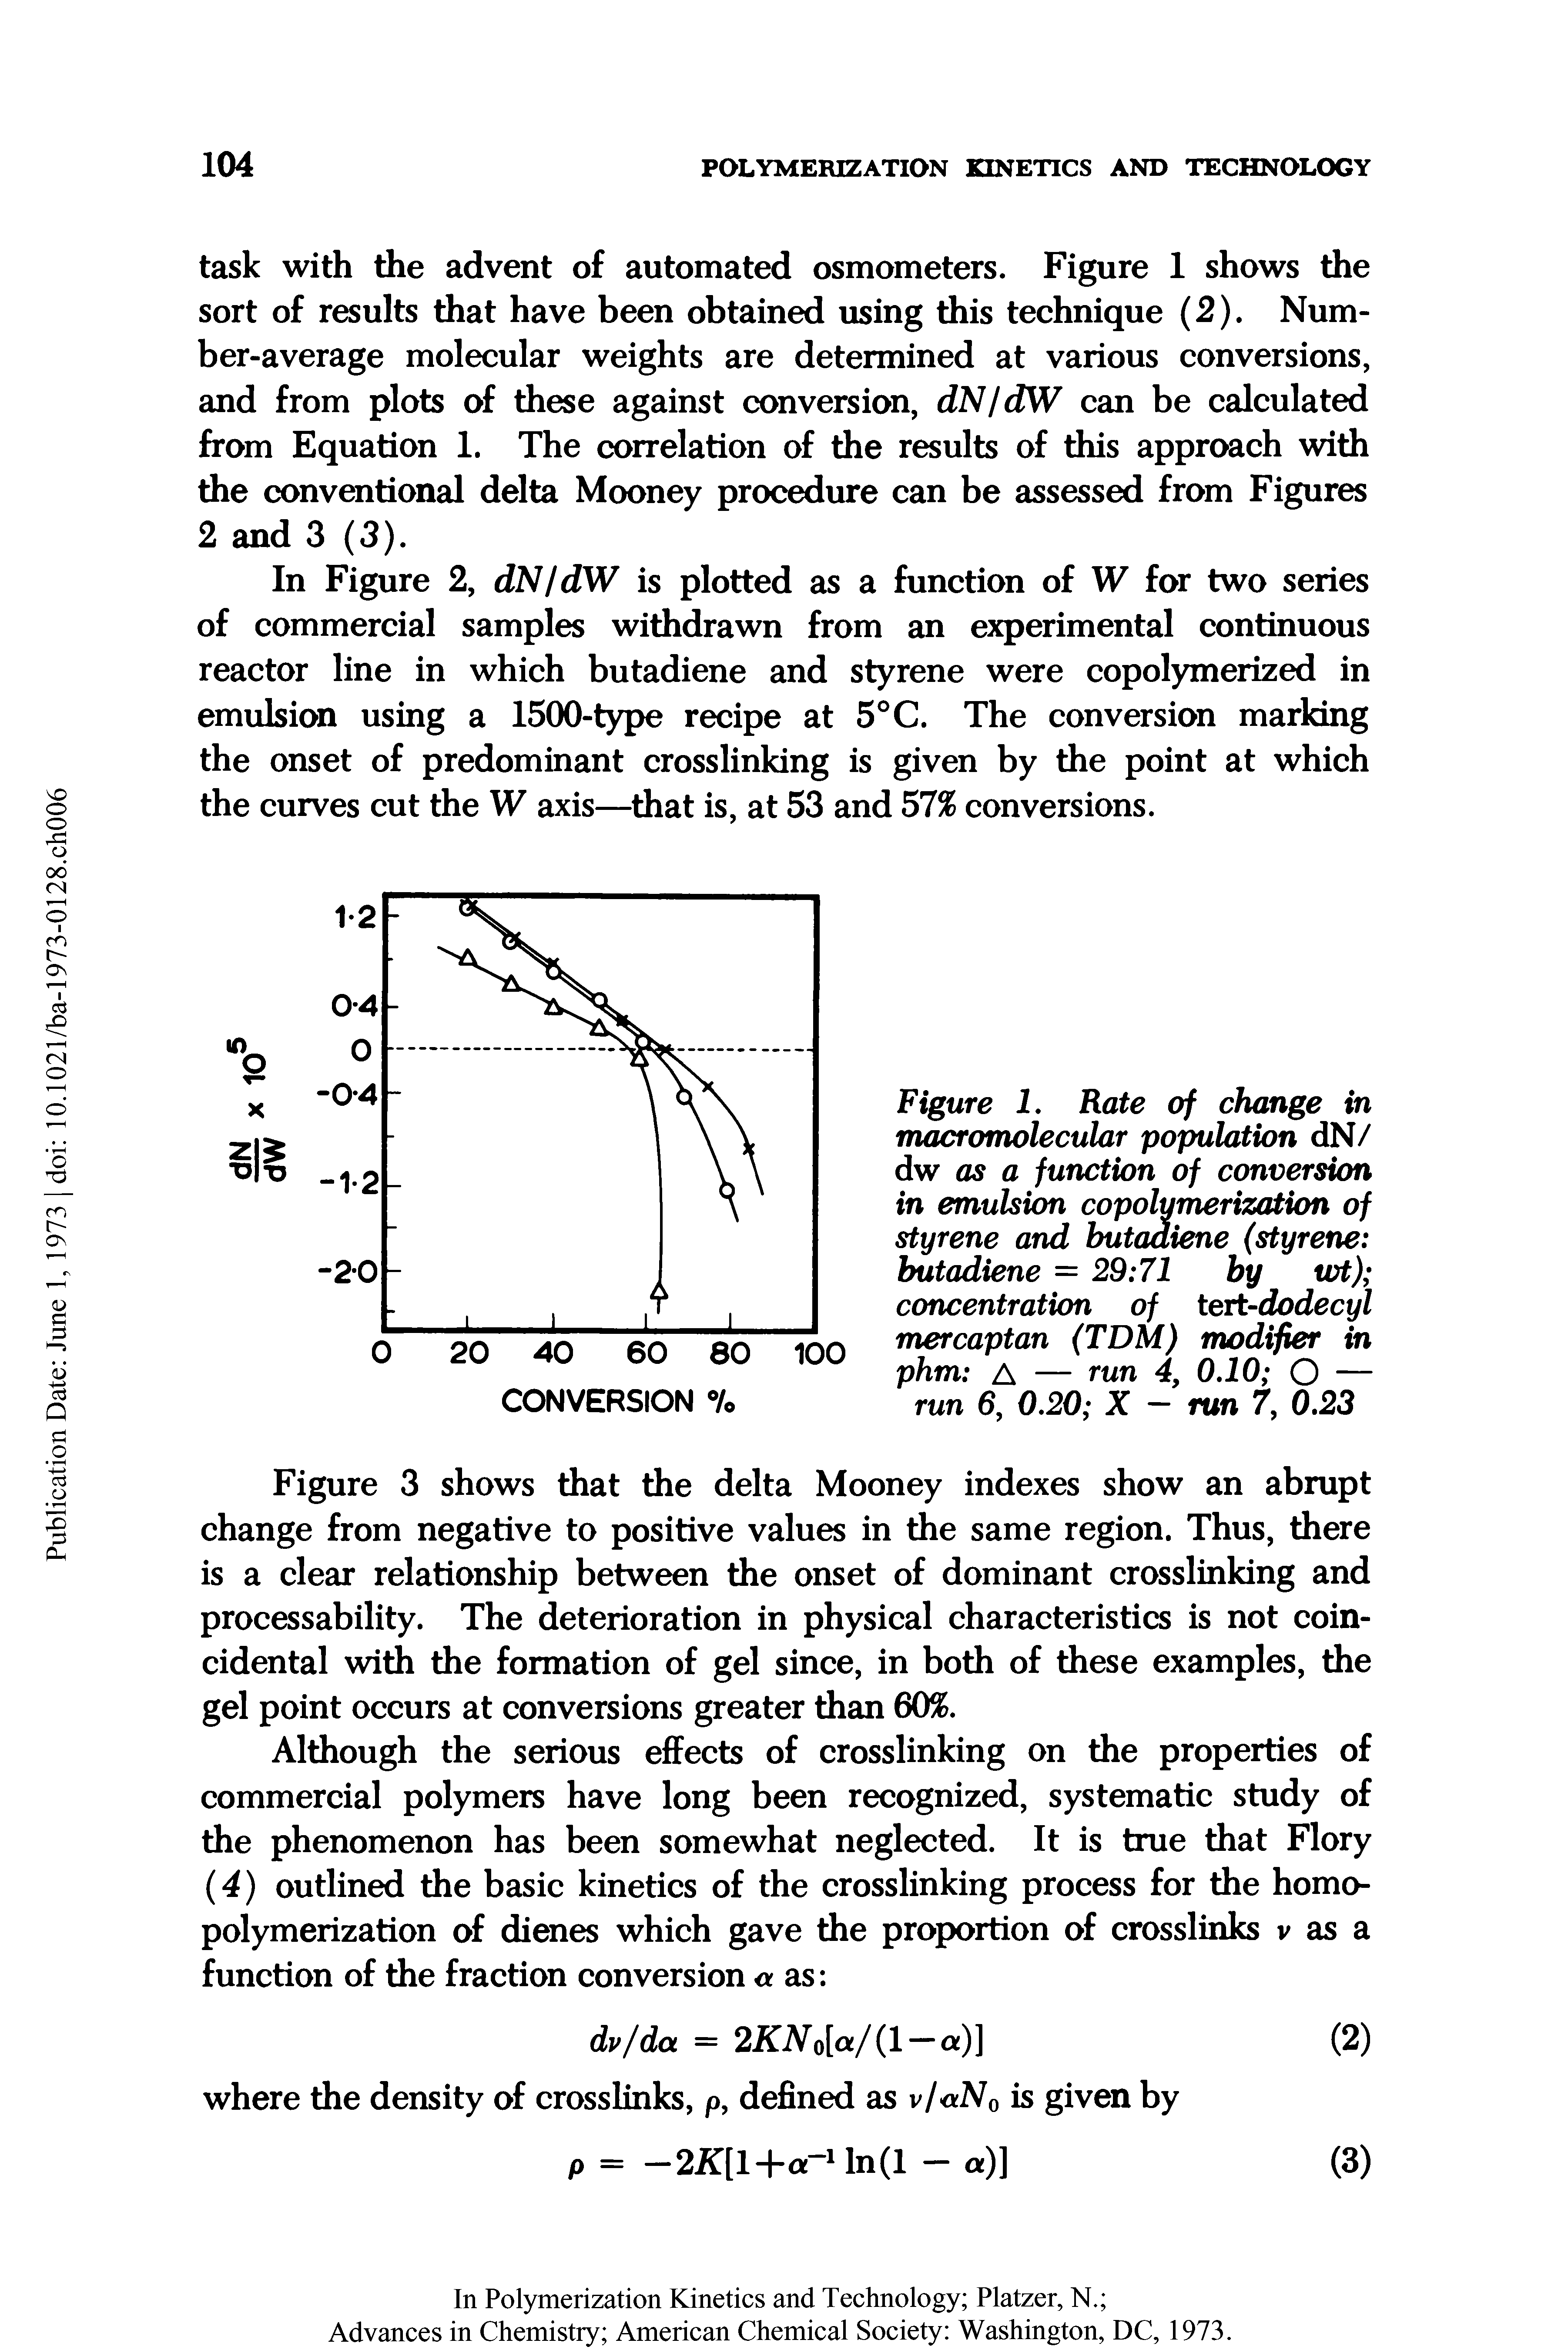 Figure I. Rate of change in macromolecular population dN/ dw as a function of conversion in emulsion copolymerization of styrene and butadiene (styrene butadiene = 29 71 by tot) concentration of tert-dodecyl mercaptan (TDM) modifier in phm A — run 4, 0.10 O — run 6, 0.20 X — run 7, 0.23...